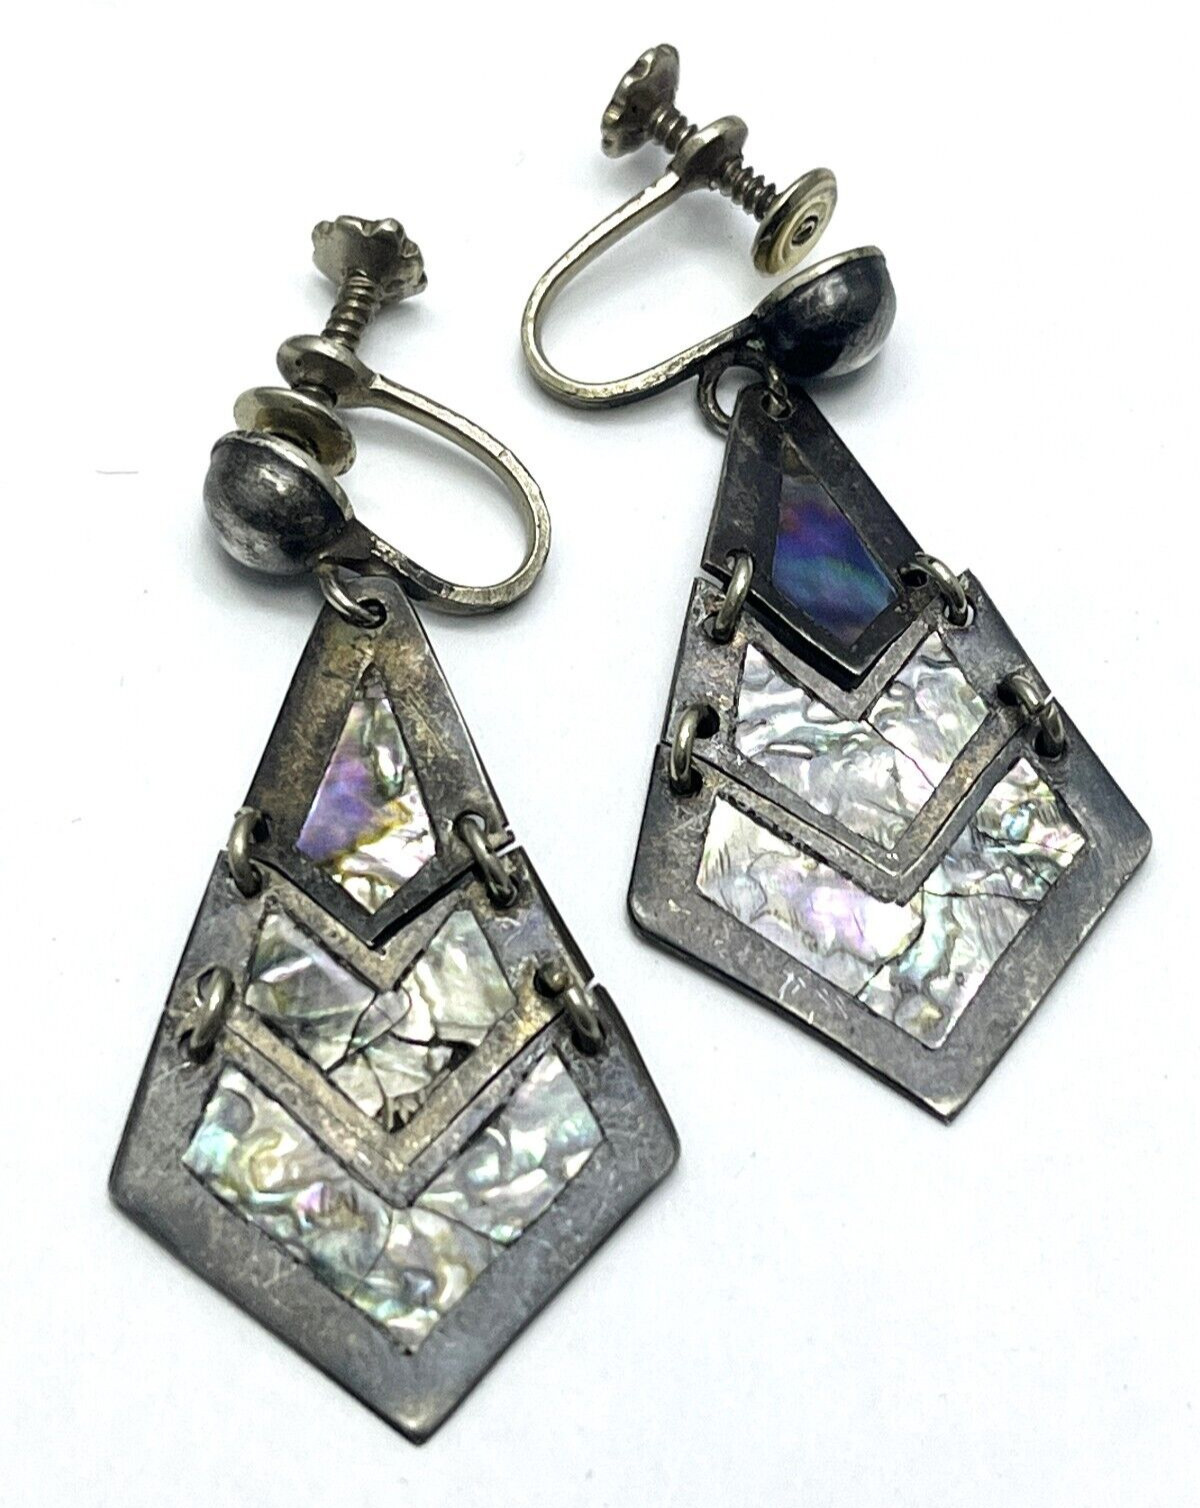 Vintage Sterling Silver Abalone Shell Earrings - image 1